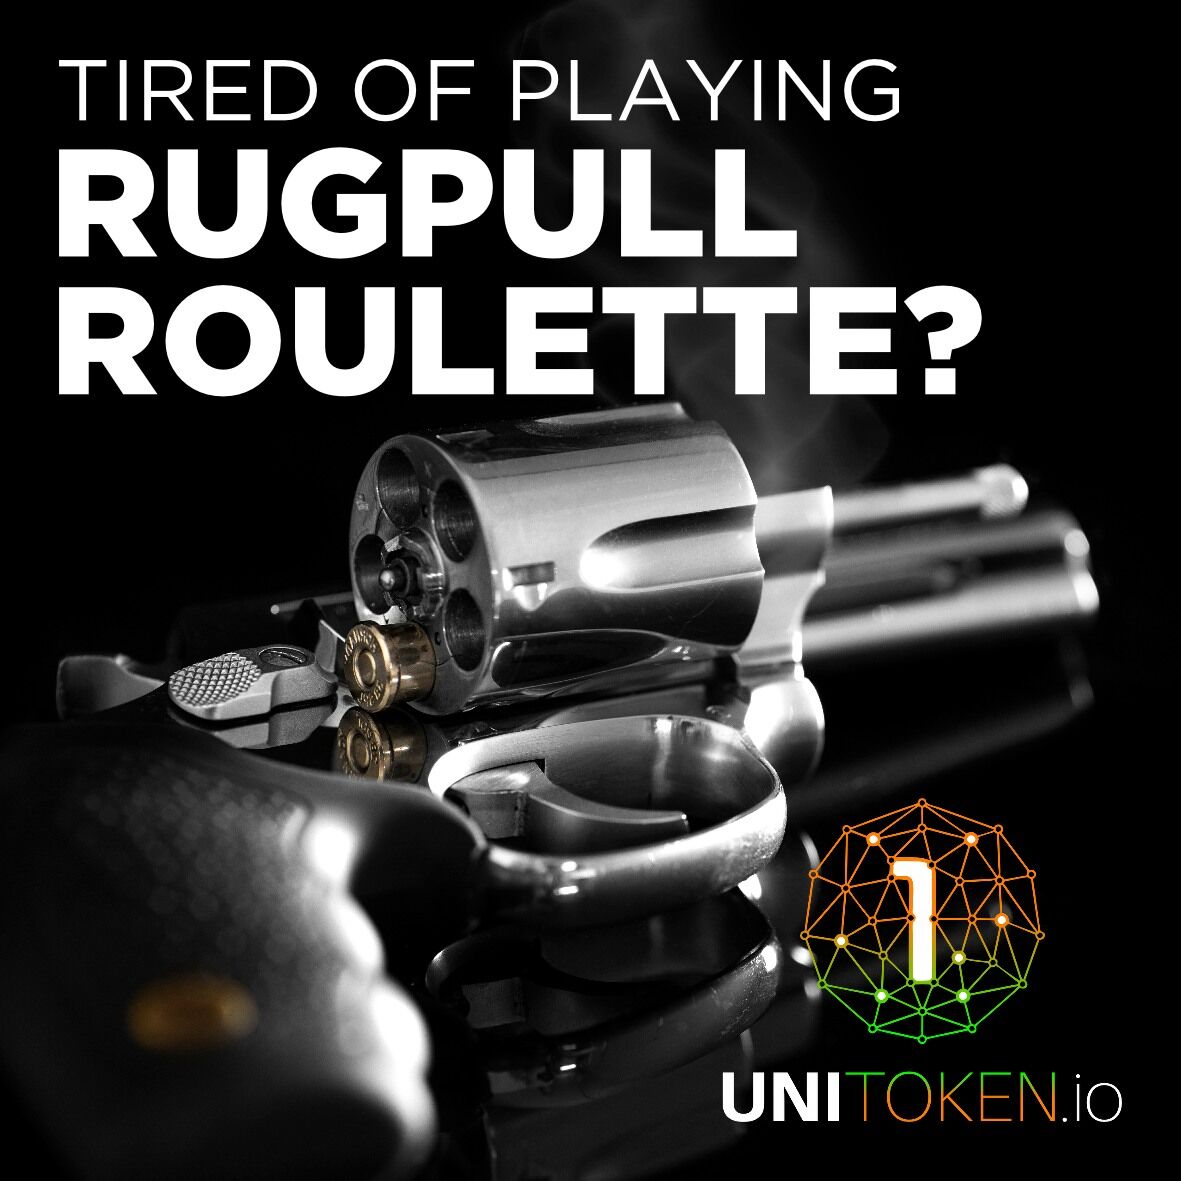 Tired of playing Rugpull Roulette? We have something built to last and pump and dump proof here! #UniToken #NoPumpAndDump #tokensale #tokenlaunch #cryptocurrency